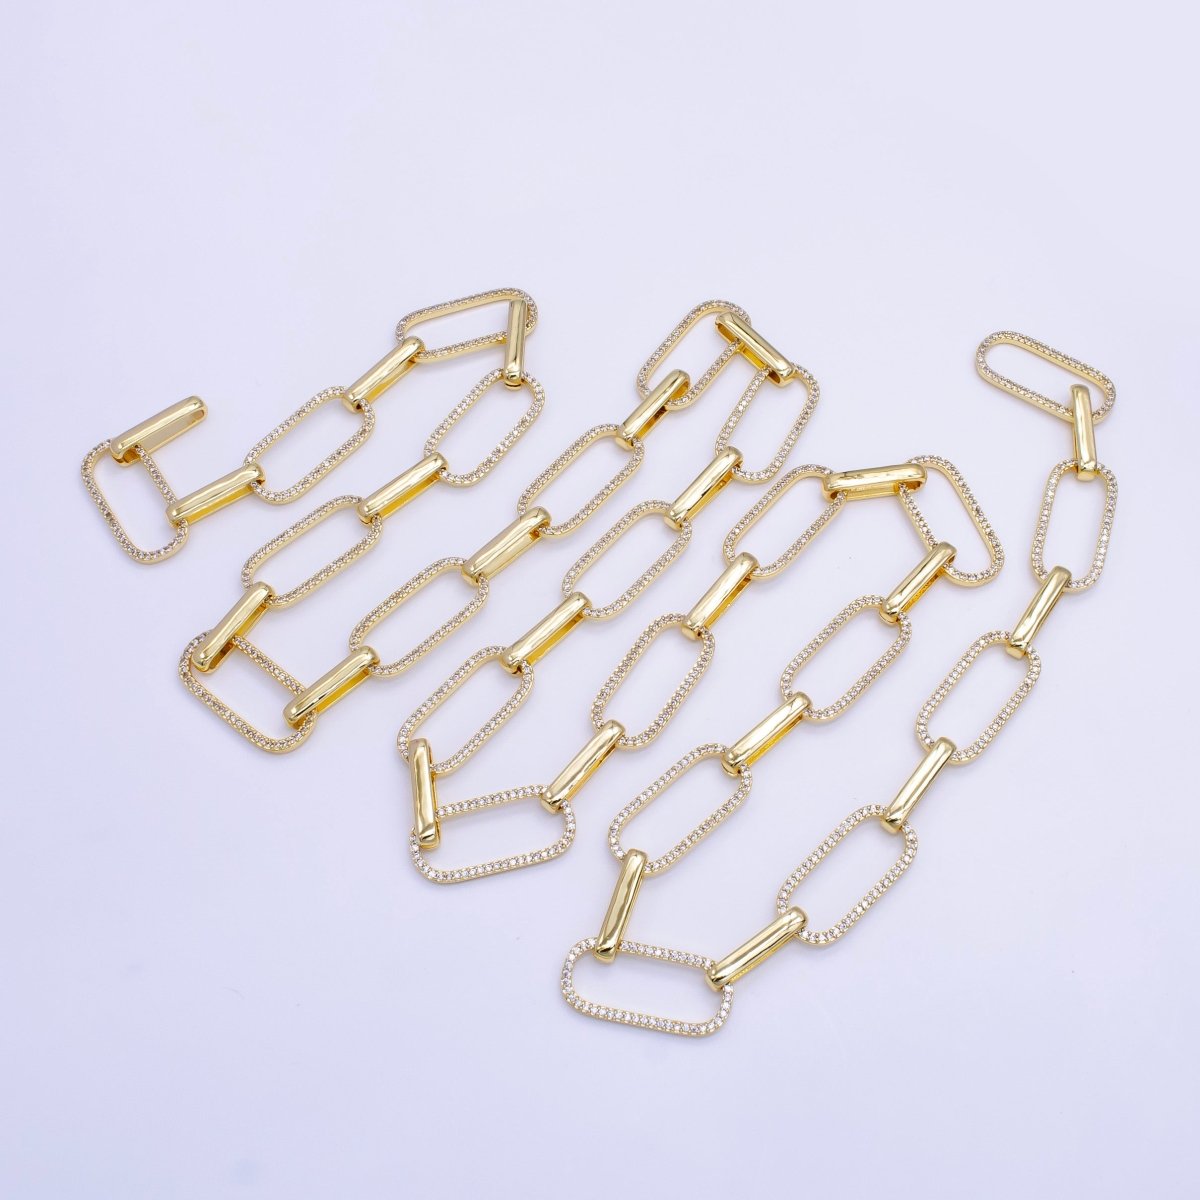 Bold Gold Micro Pave Paperclip Chain by Meter, CZ Specialty Link Chain Necklace by Meter, For Fashion Jewelry Making, 24K Gold Filled UNIQUE PAPER CLIP For Necklace Bracelet Anklet Supply Component | WA - 1419 Clearance Pricing - DLUXCA